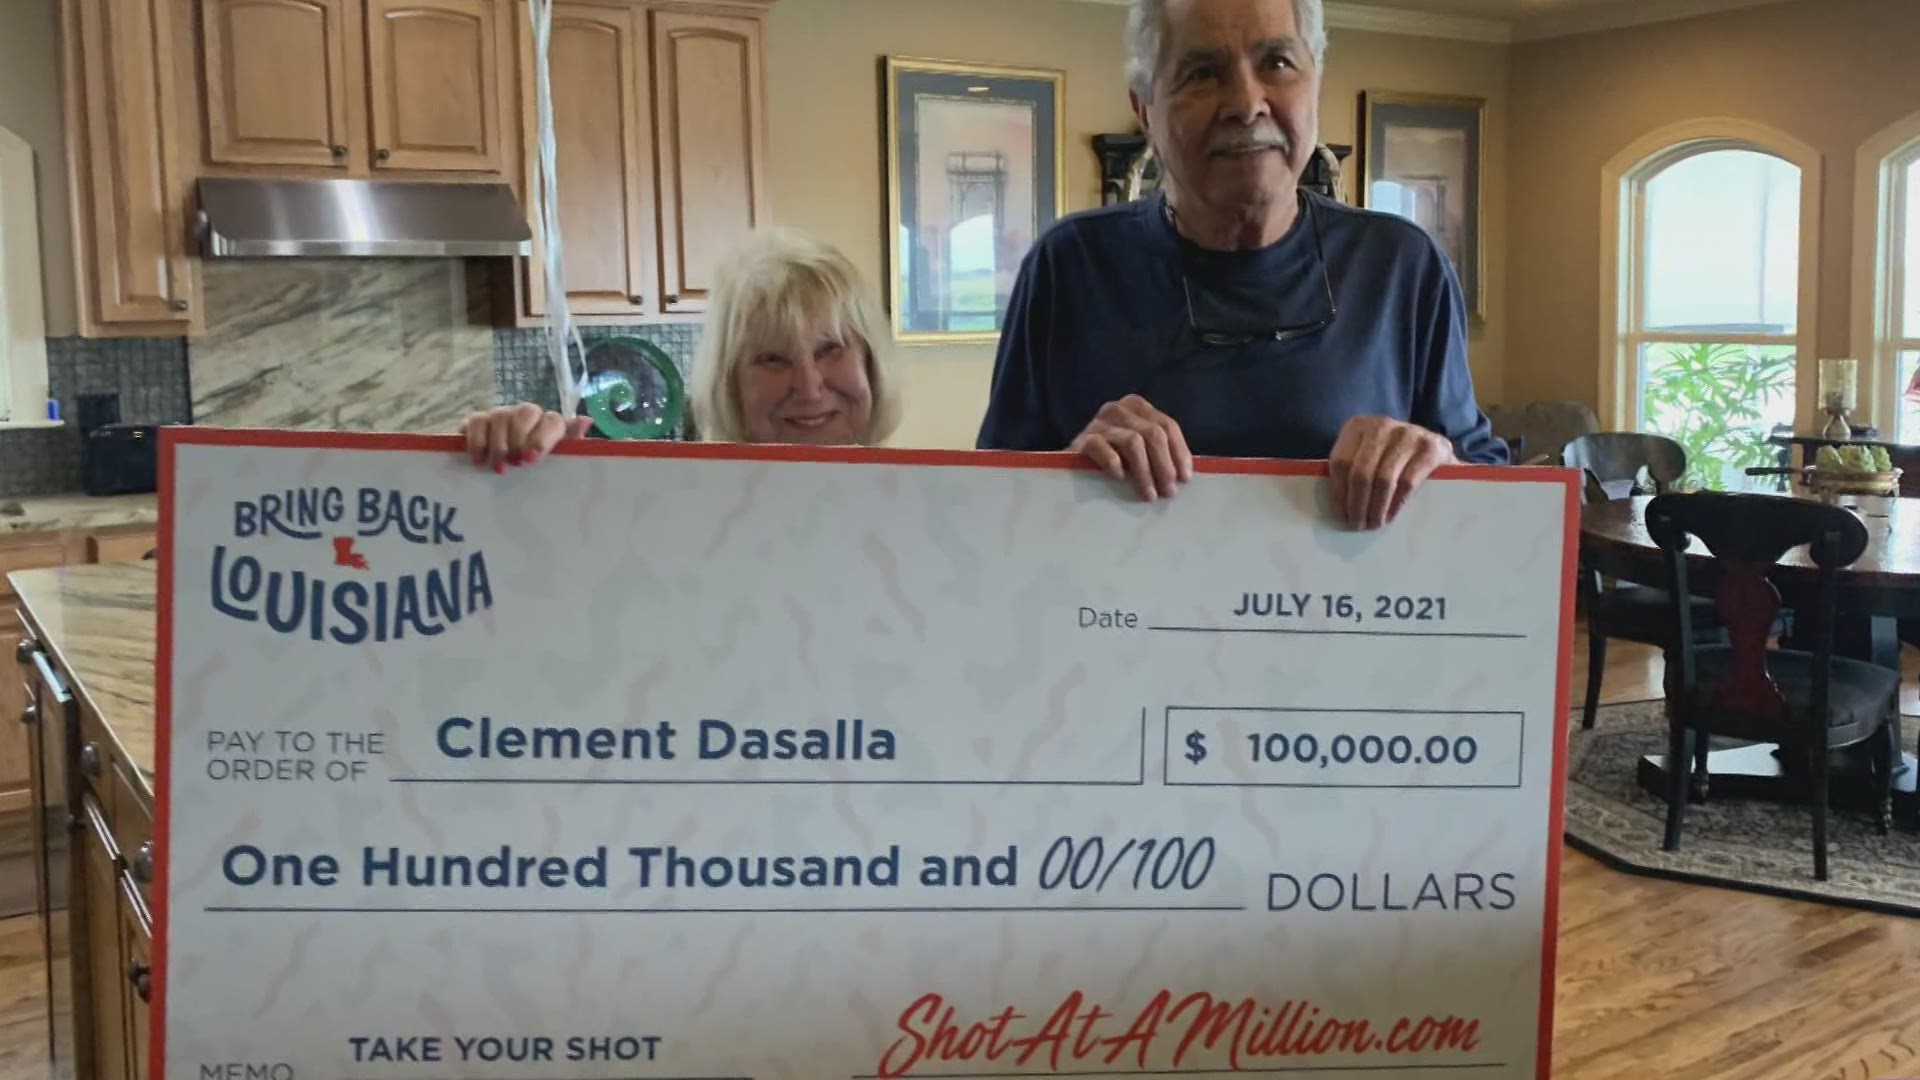 Two winners have been announced for the first-ever Shot at a Million vaccine lottery.